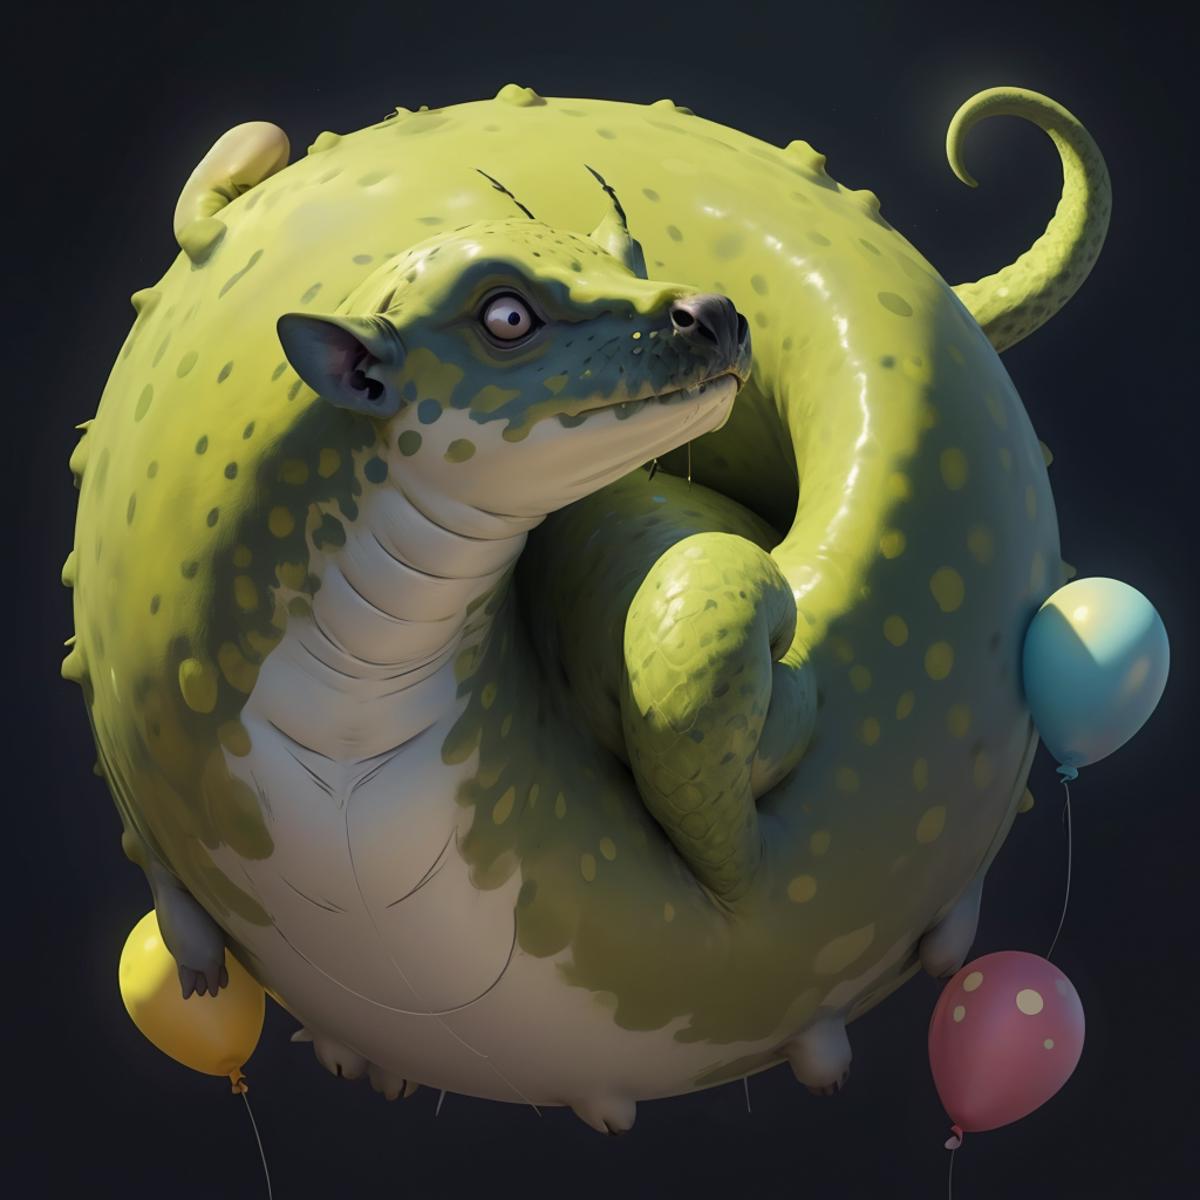 Round animals, balloon shape body [concept] image by mnemic